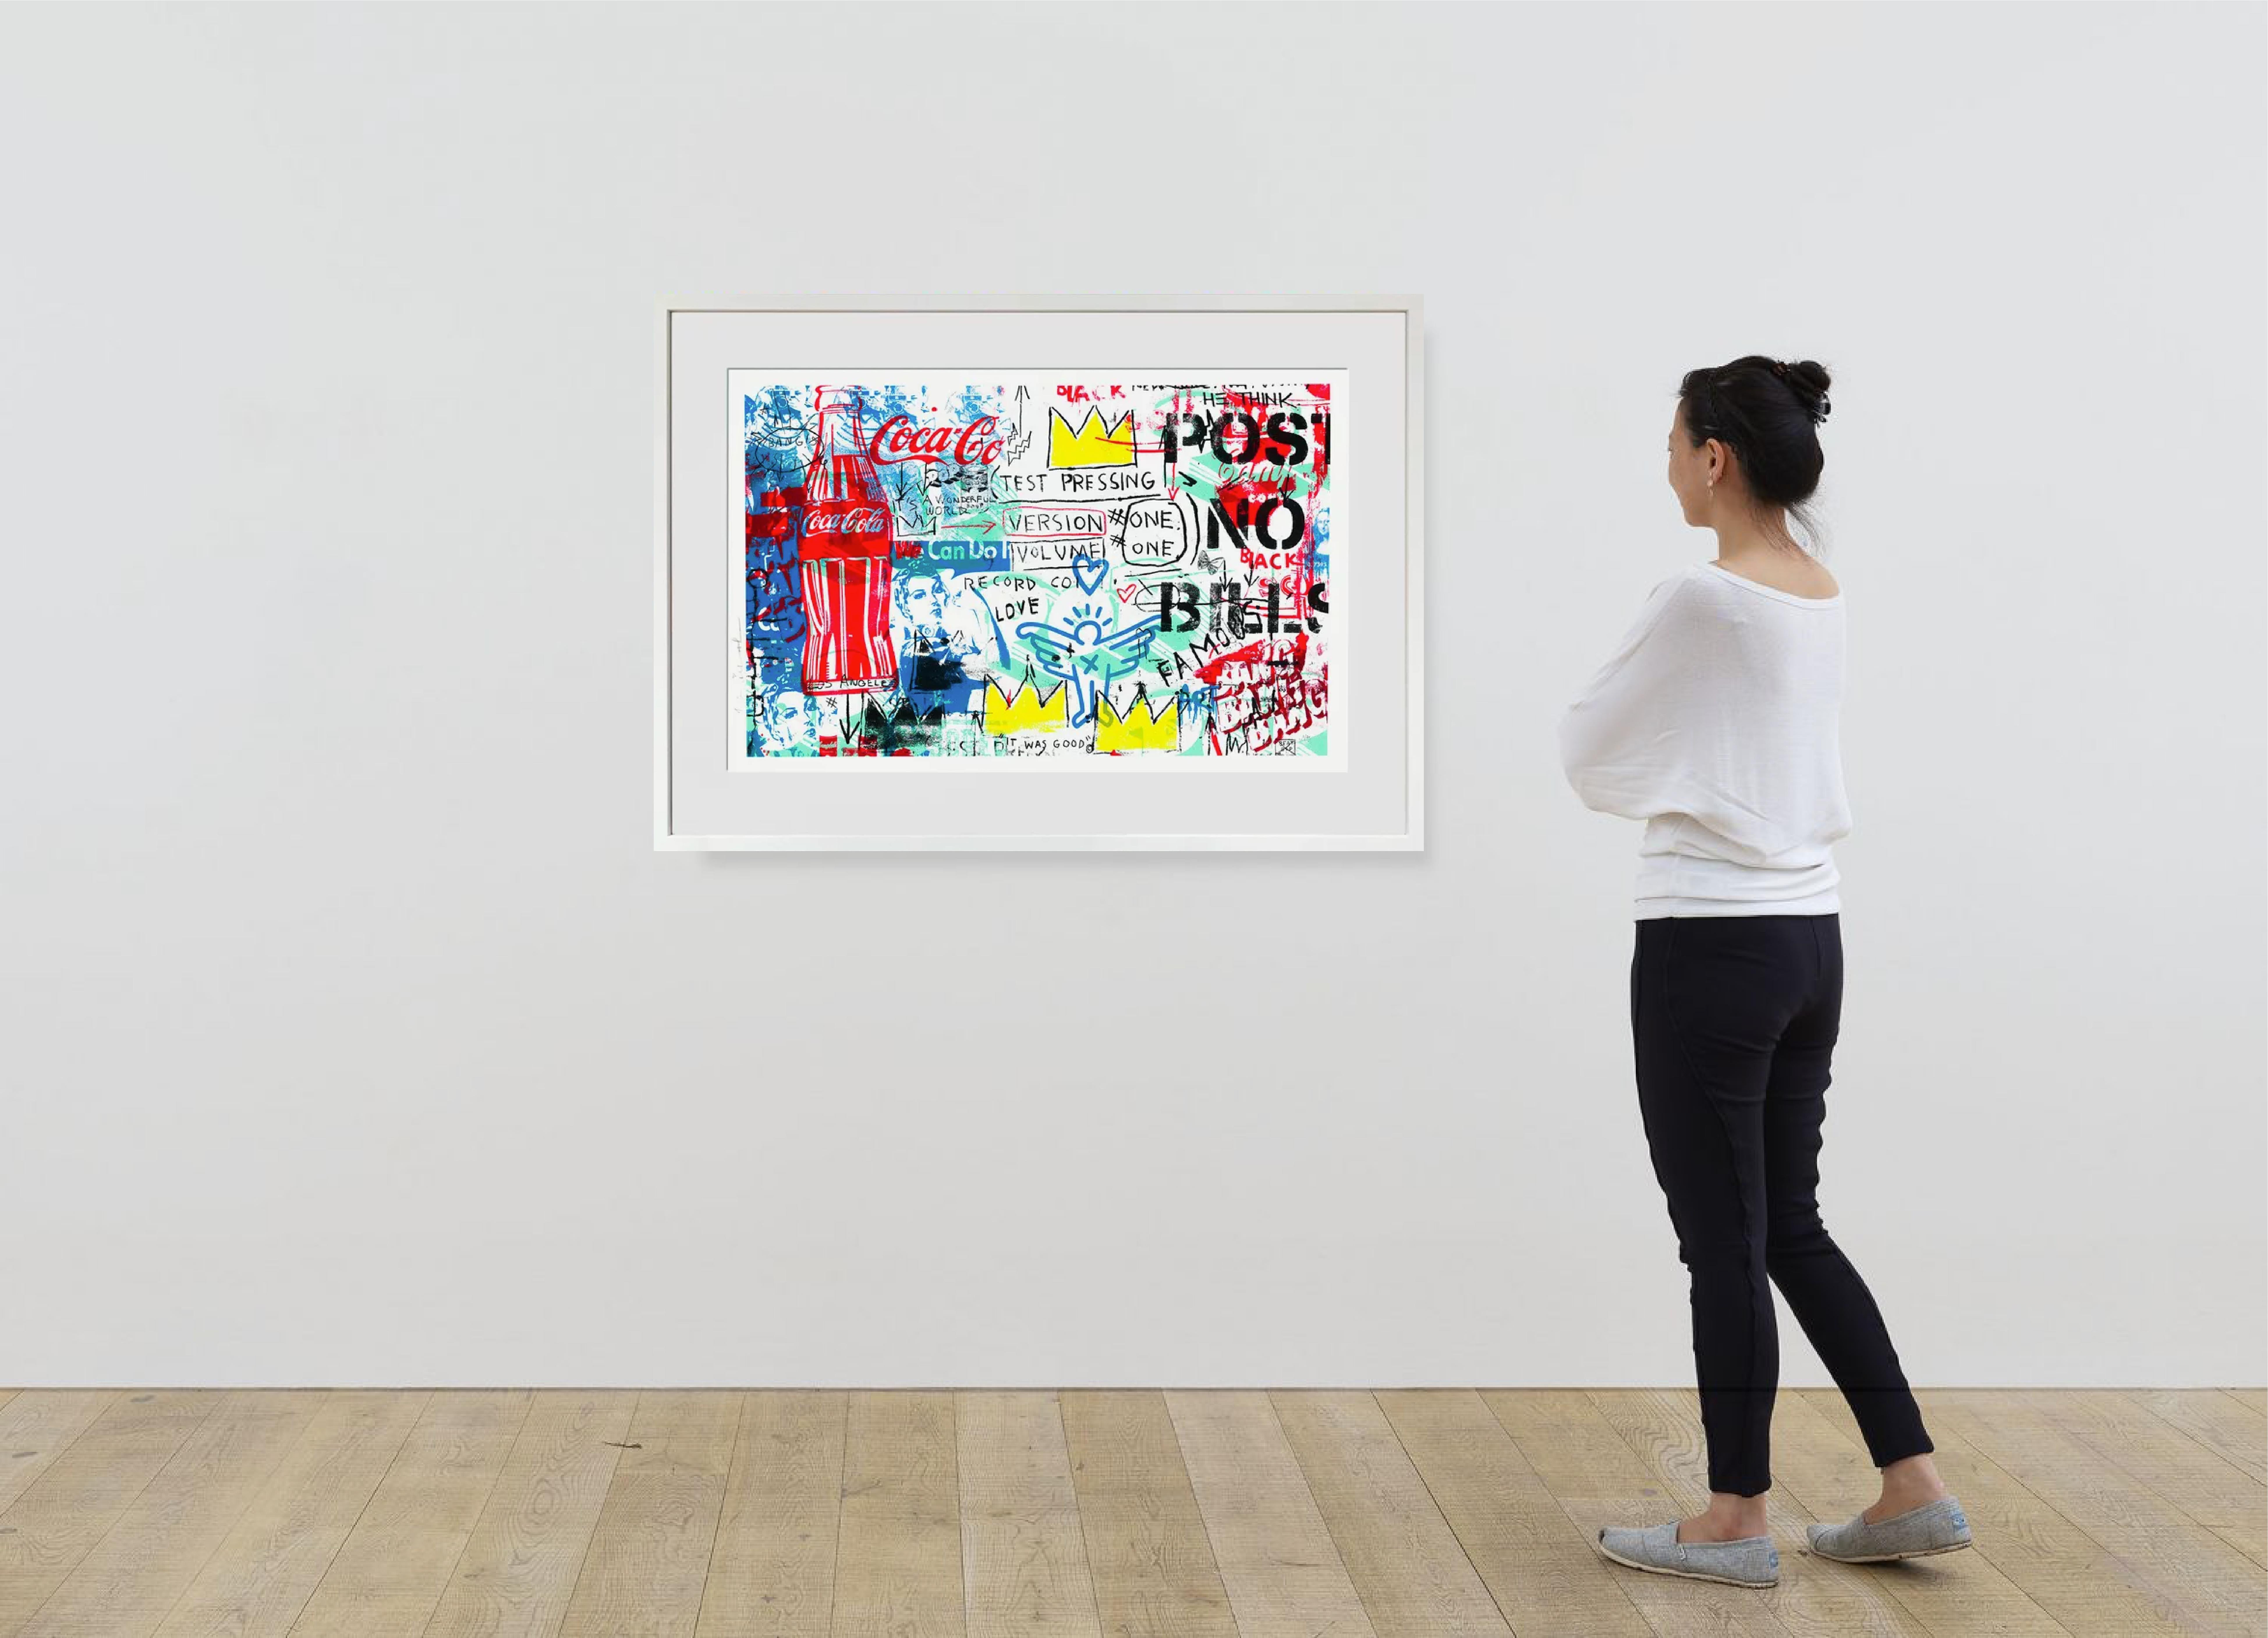 No Post, No Bills, Silkscreen on Archival Paper by Mr. Brainwash

For more than a decade, Thierry Guetta, under his moniker, Mr. Brainwash, has been pushing the envelope of contemporary art. The orchestrated collision of street art and pop art has